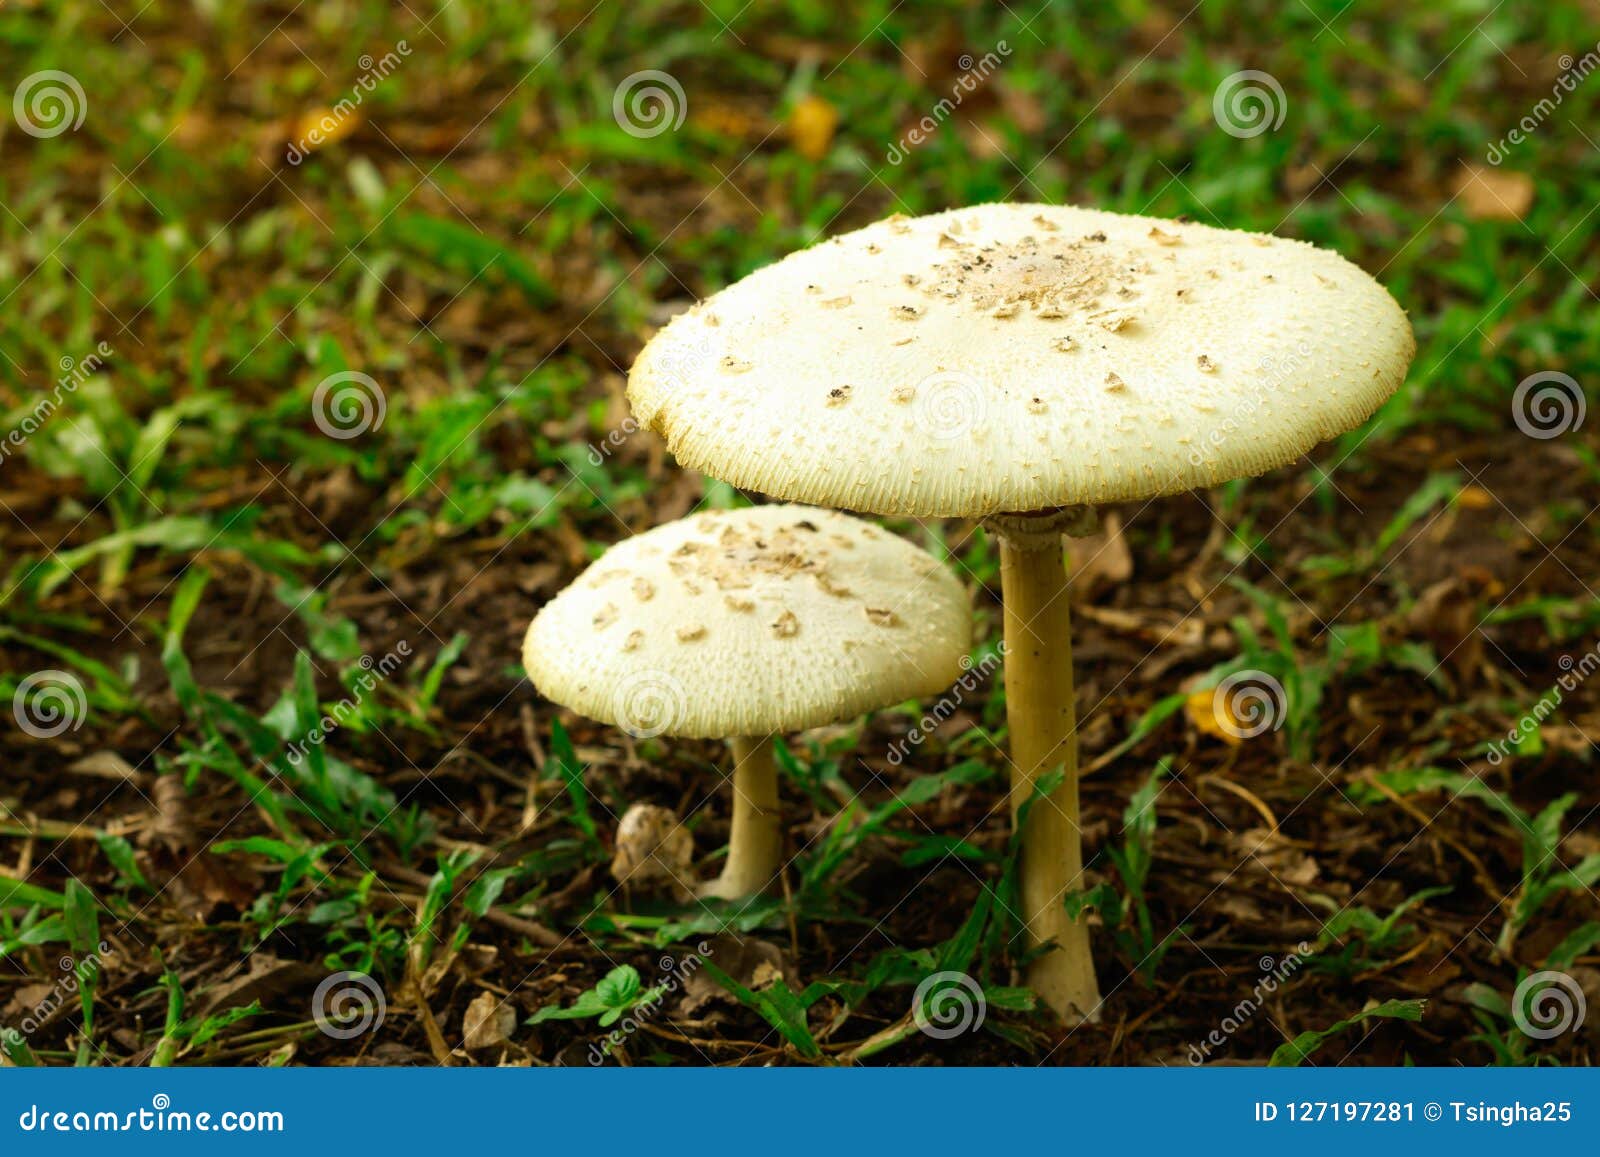 Poisonous Mushrooms Stock Image Image Of Meadows Growing 127197281